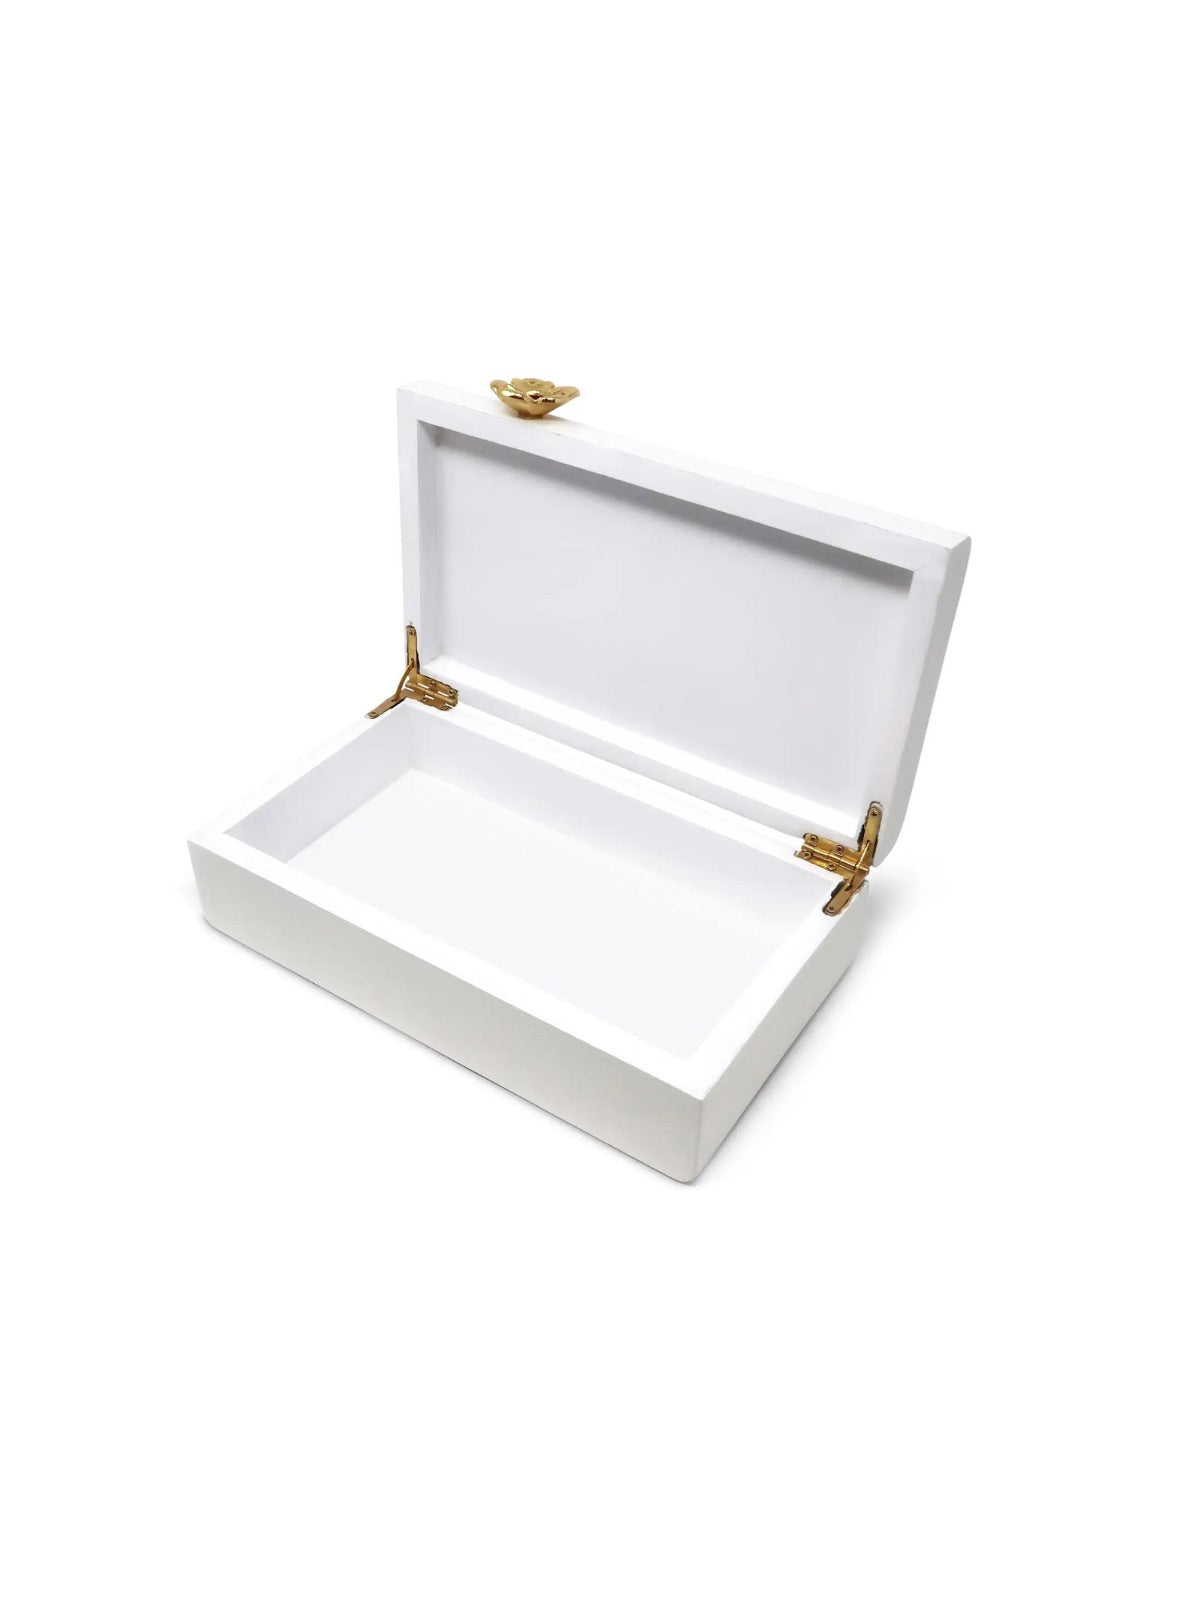 White Decorative Wooden Box with Gold Flower Detail Sold by KYA Home Decor.